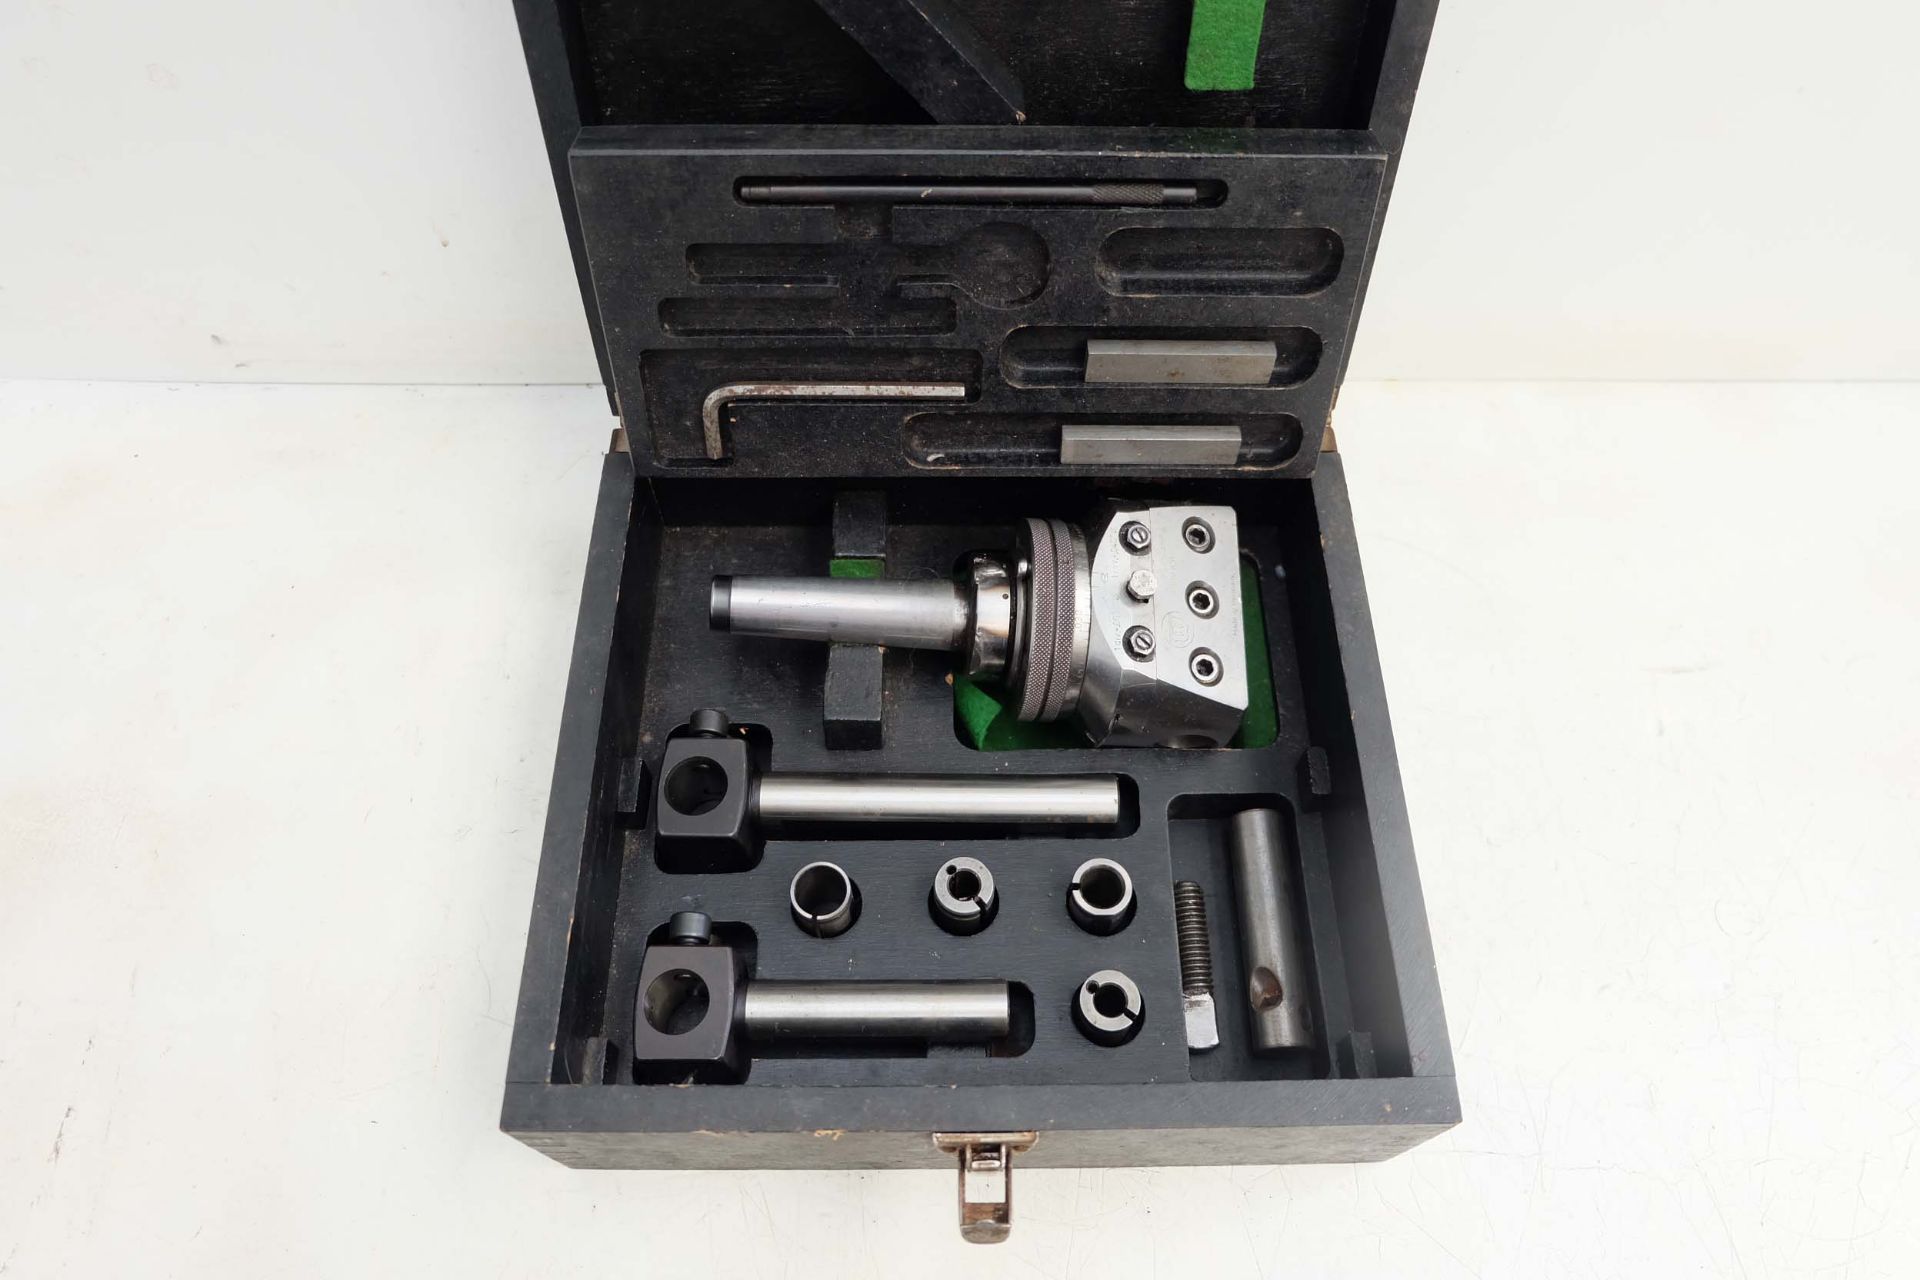 Wohlhaupter UPA3 Boring Head. Adjustment Slide45mm. Size of Head 85mm. Tool Hole Size: 19mm (3/4").